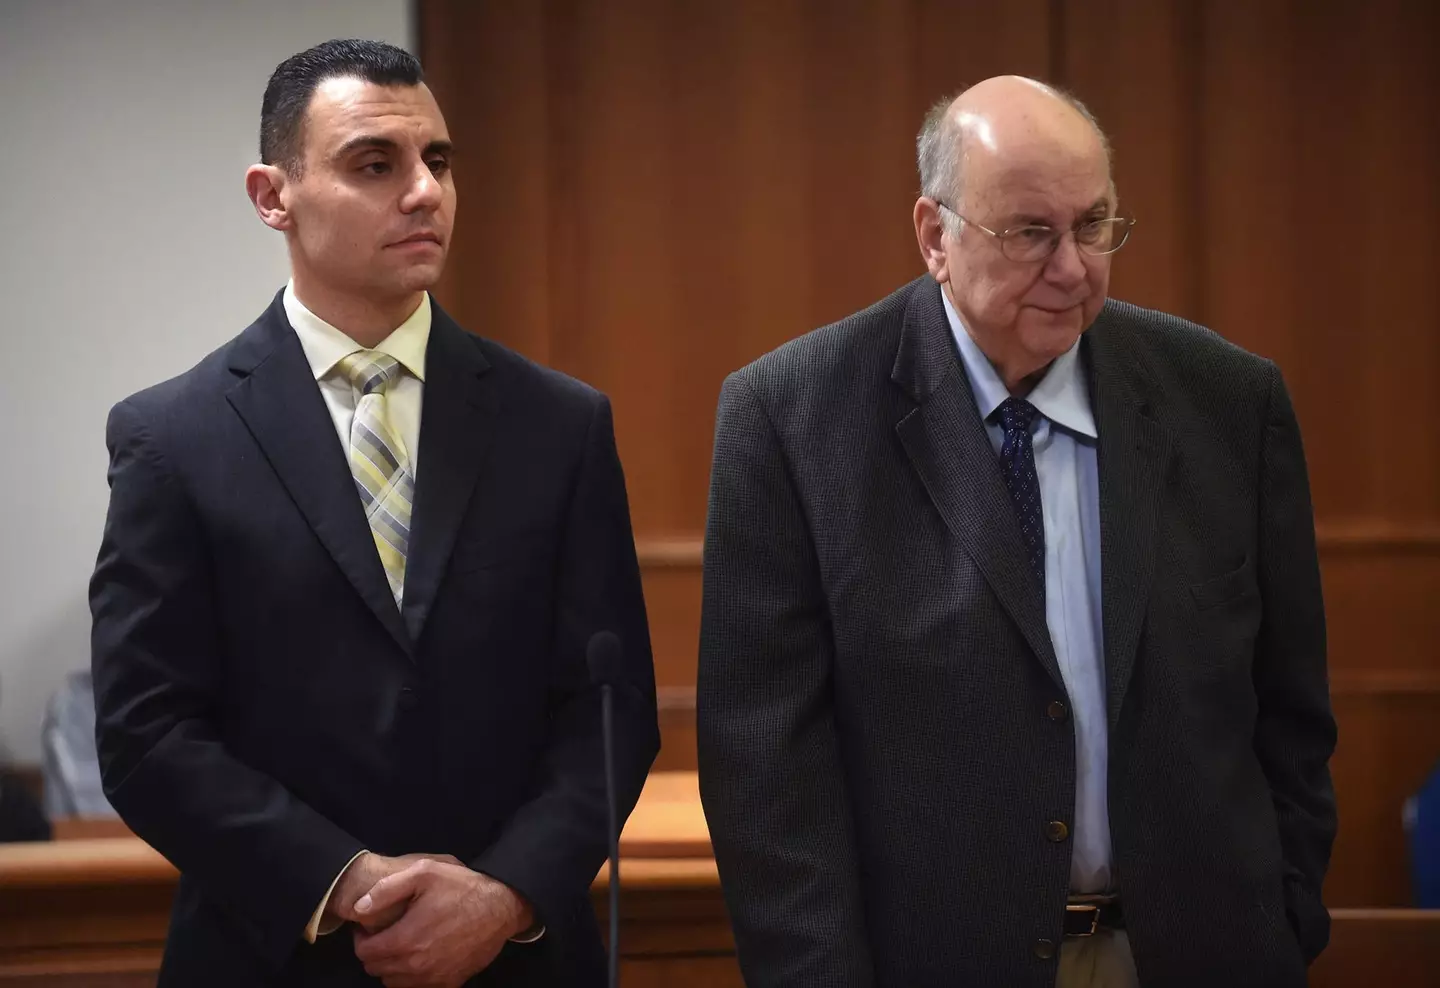 Richard Dabate (left) was found guilty of all three charges against him – murder, tampering with evidence and making a false statement to authorities.